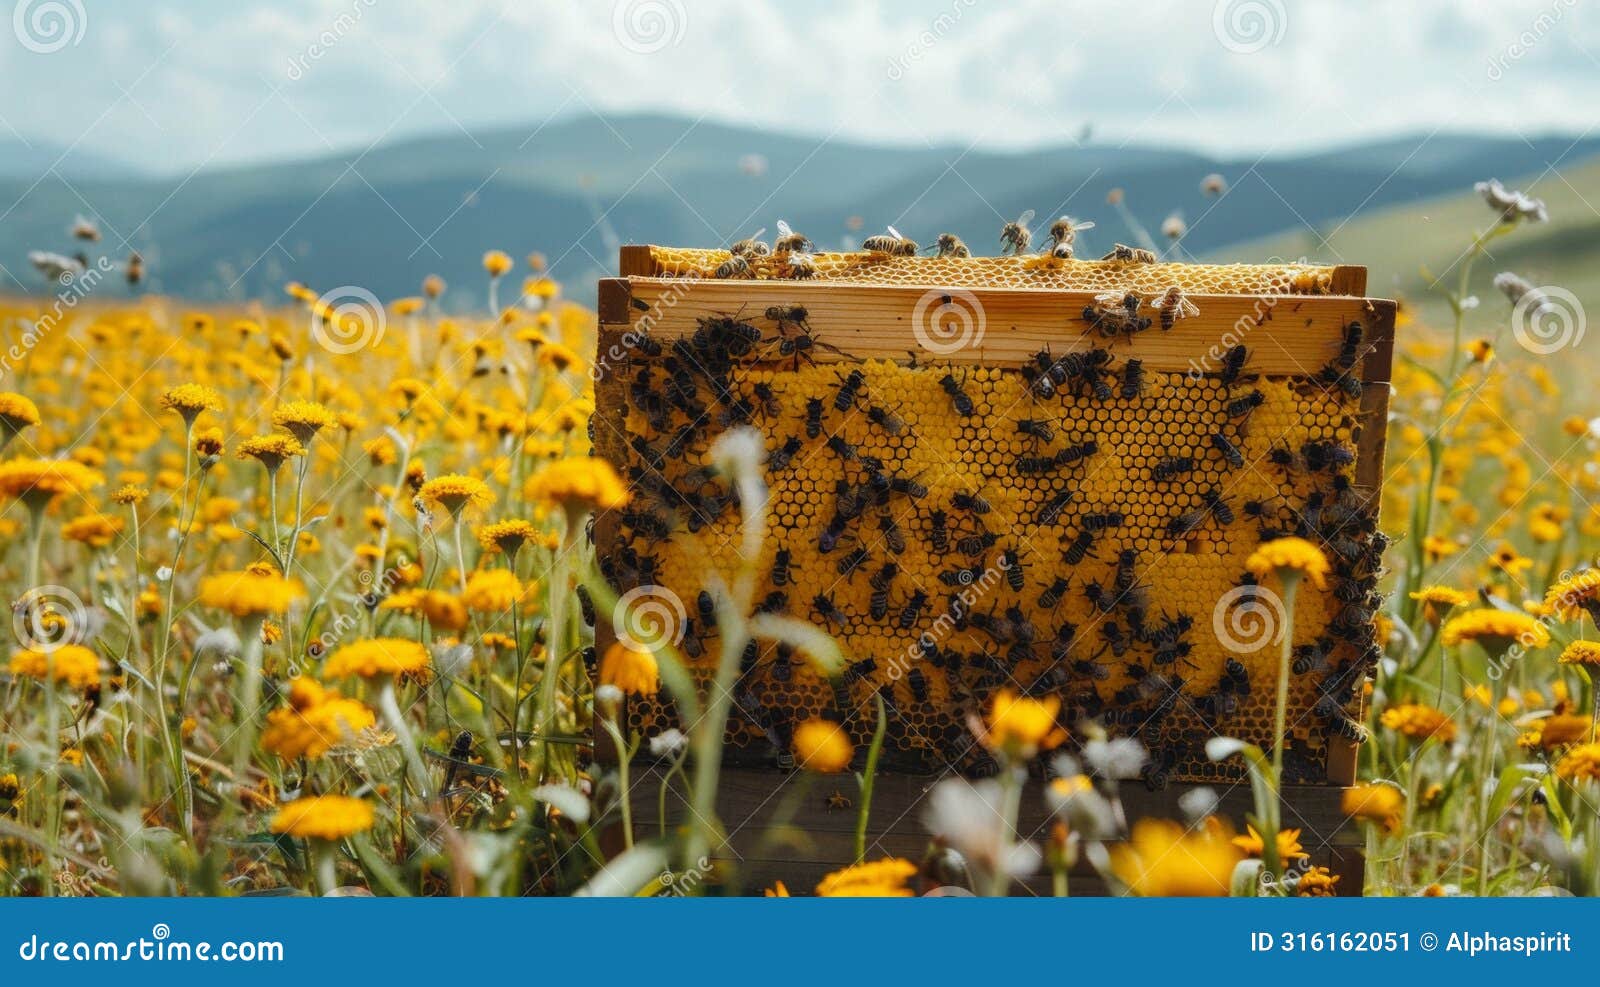 bees swarm a hive amidst a vibrant field of flowers under a clear sky, illustrating nature's pollination process